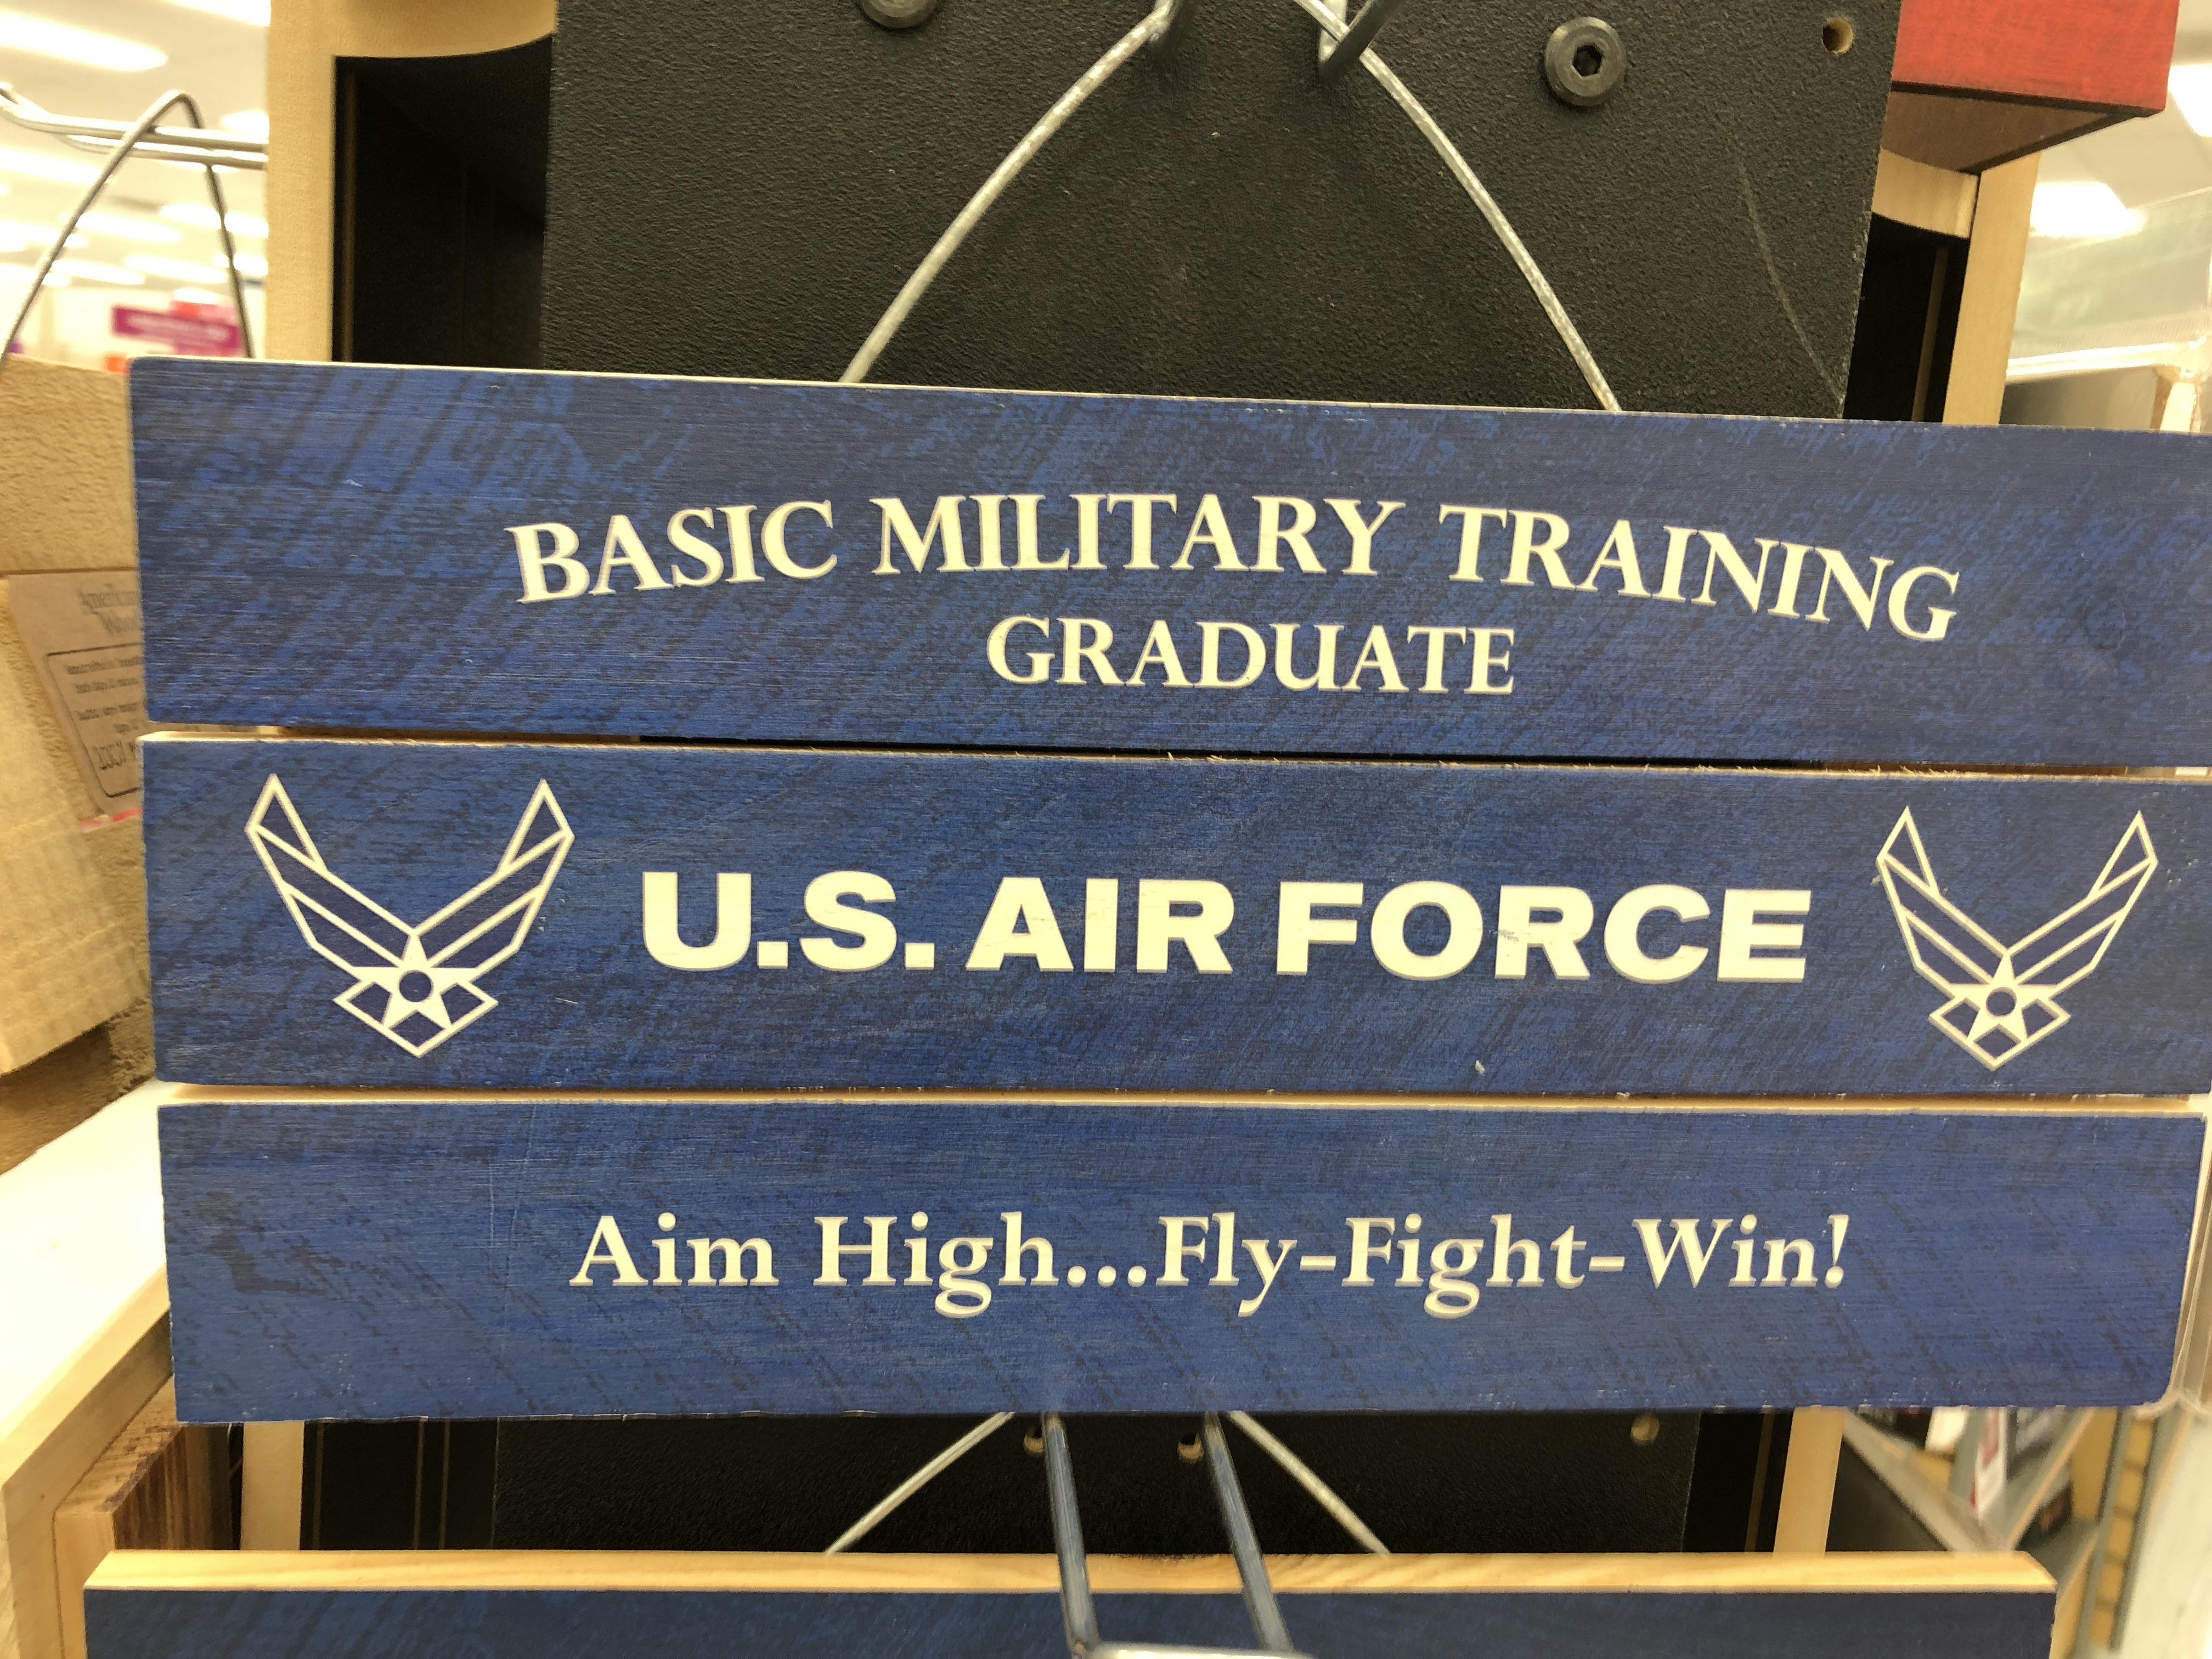 SNCO Logo - As an SNCO, should I get this for my office? : AirForce